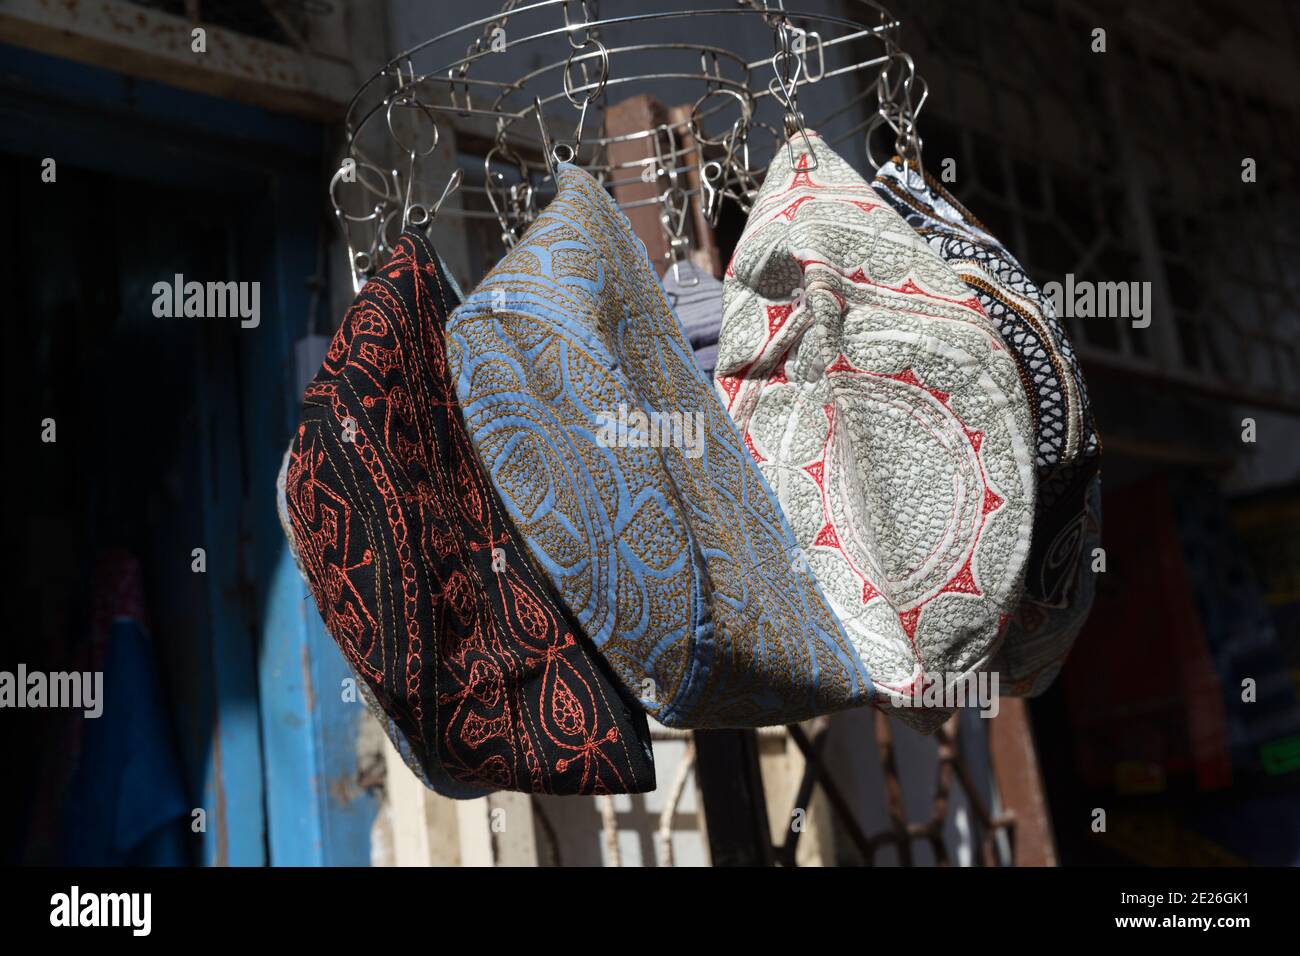 Kofia Hats For Sale In The Market Stock Photo